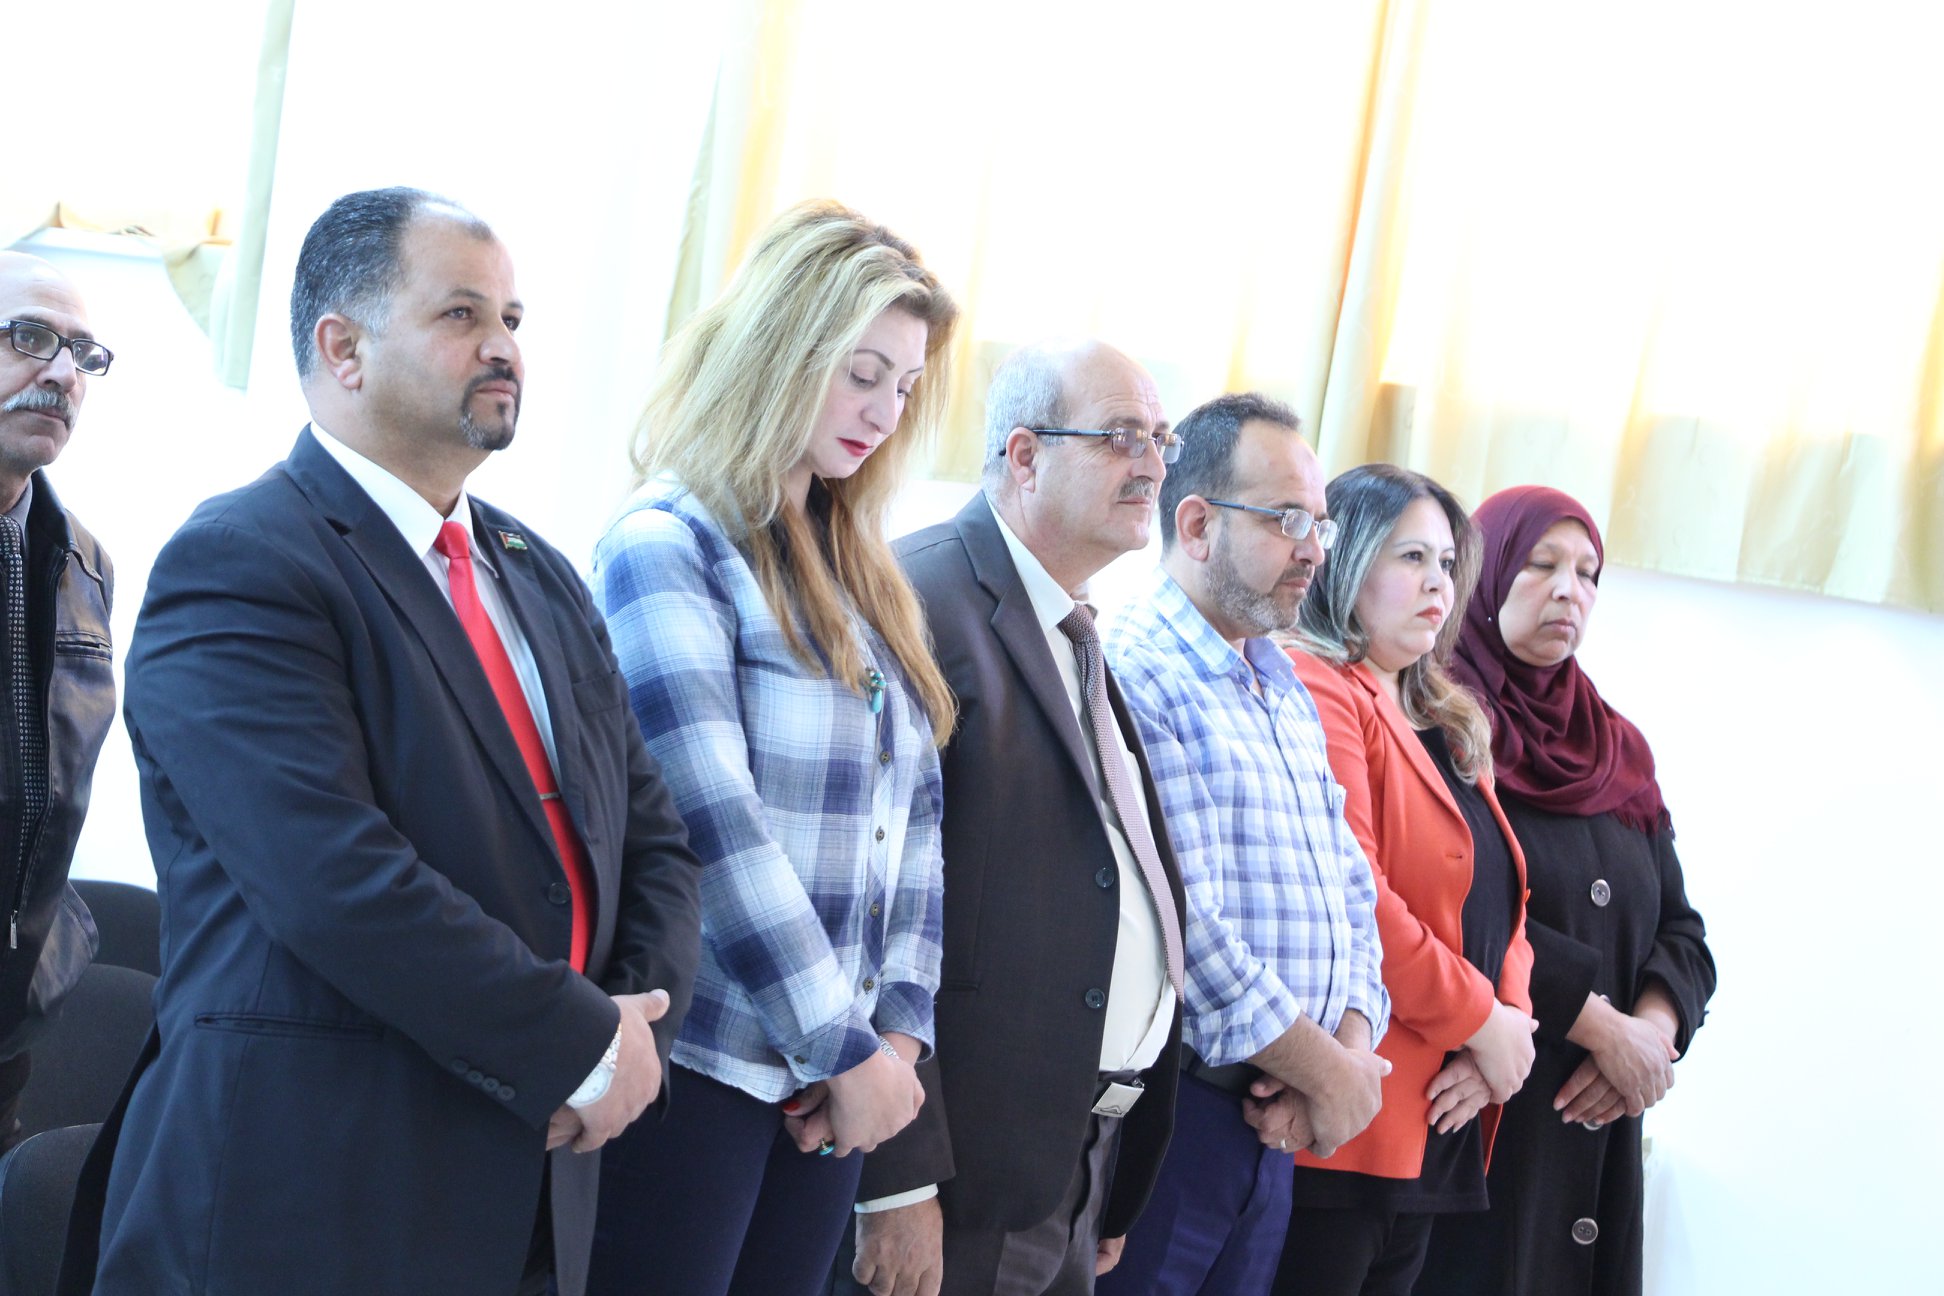  Roles for Social Change Association- ADWAR and the Technical University of Palestine organized a celebration on the occasion of International Women’s Day